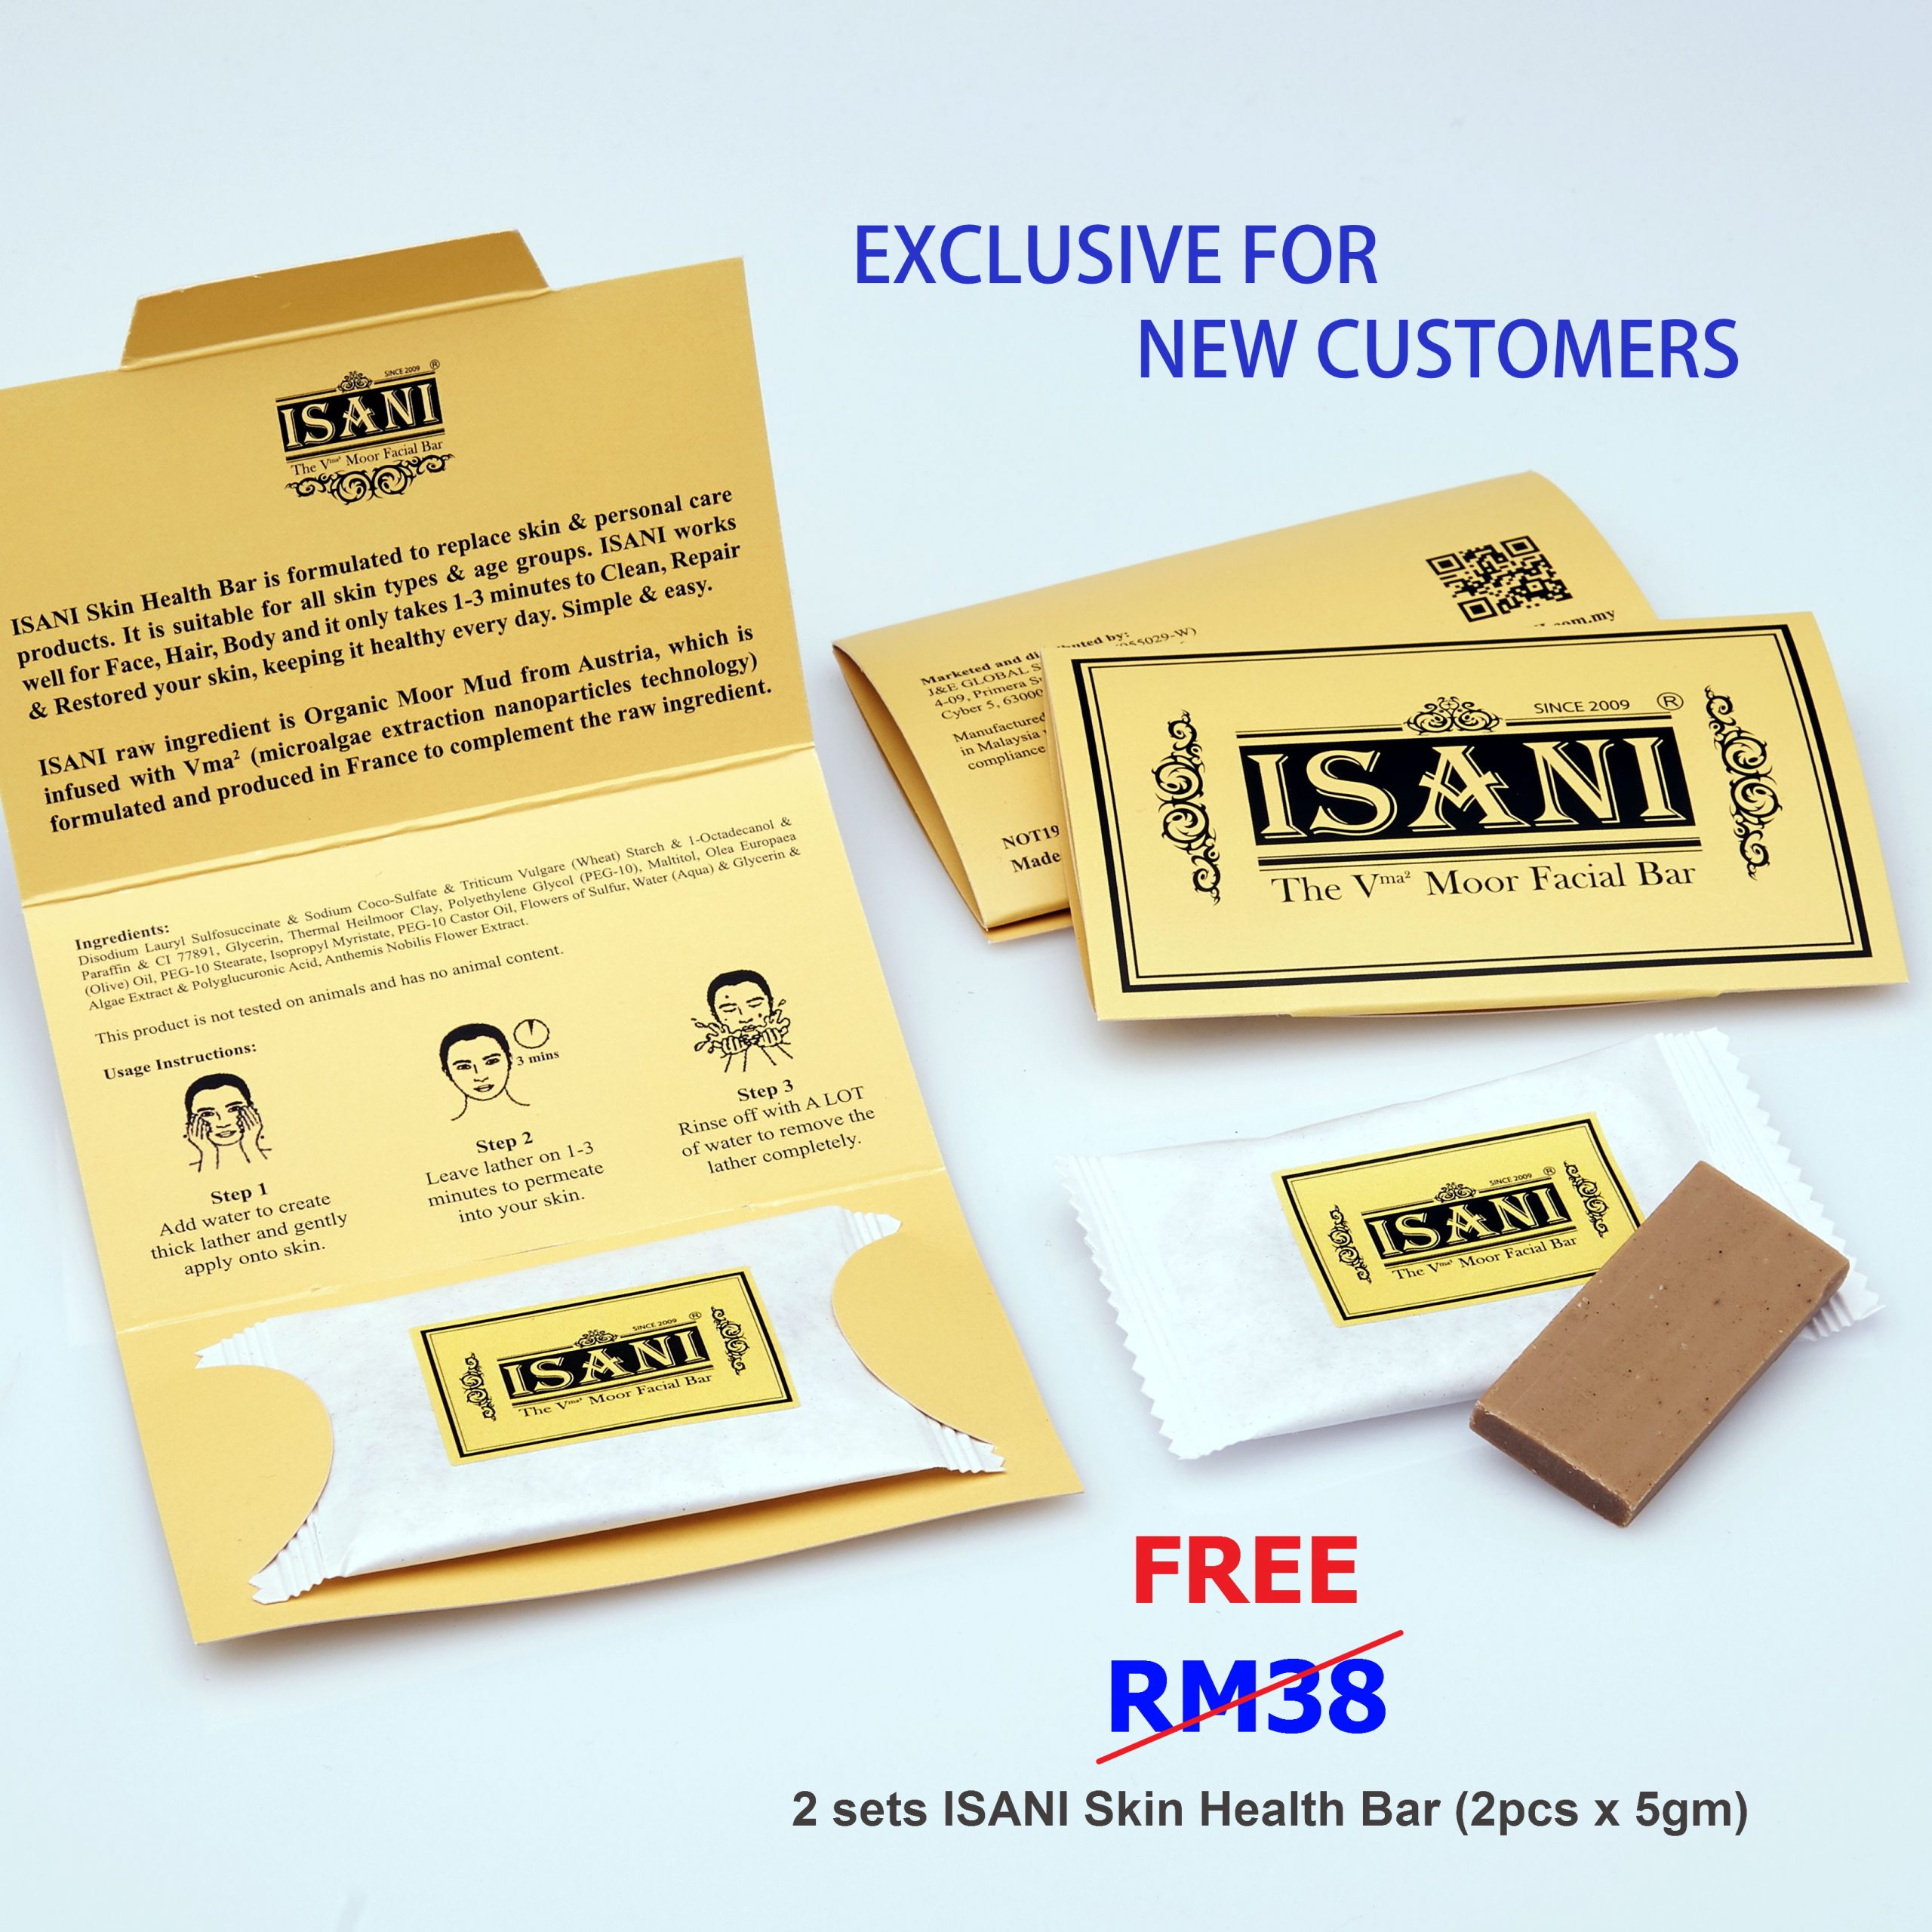 Free 2 sets ISANI exclusive for New Customer